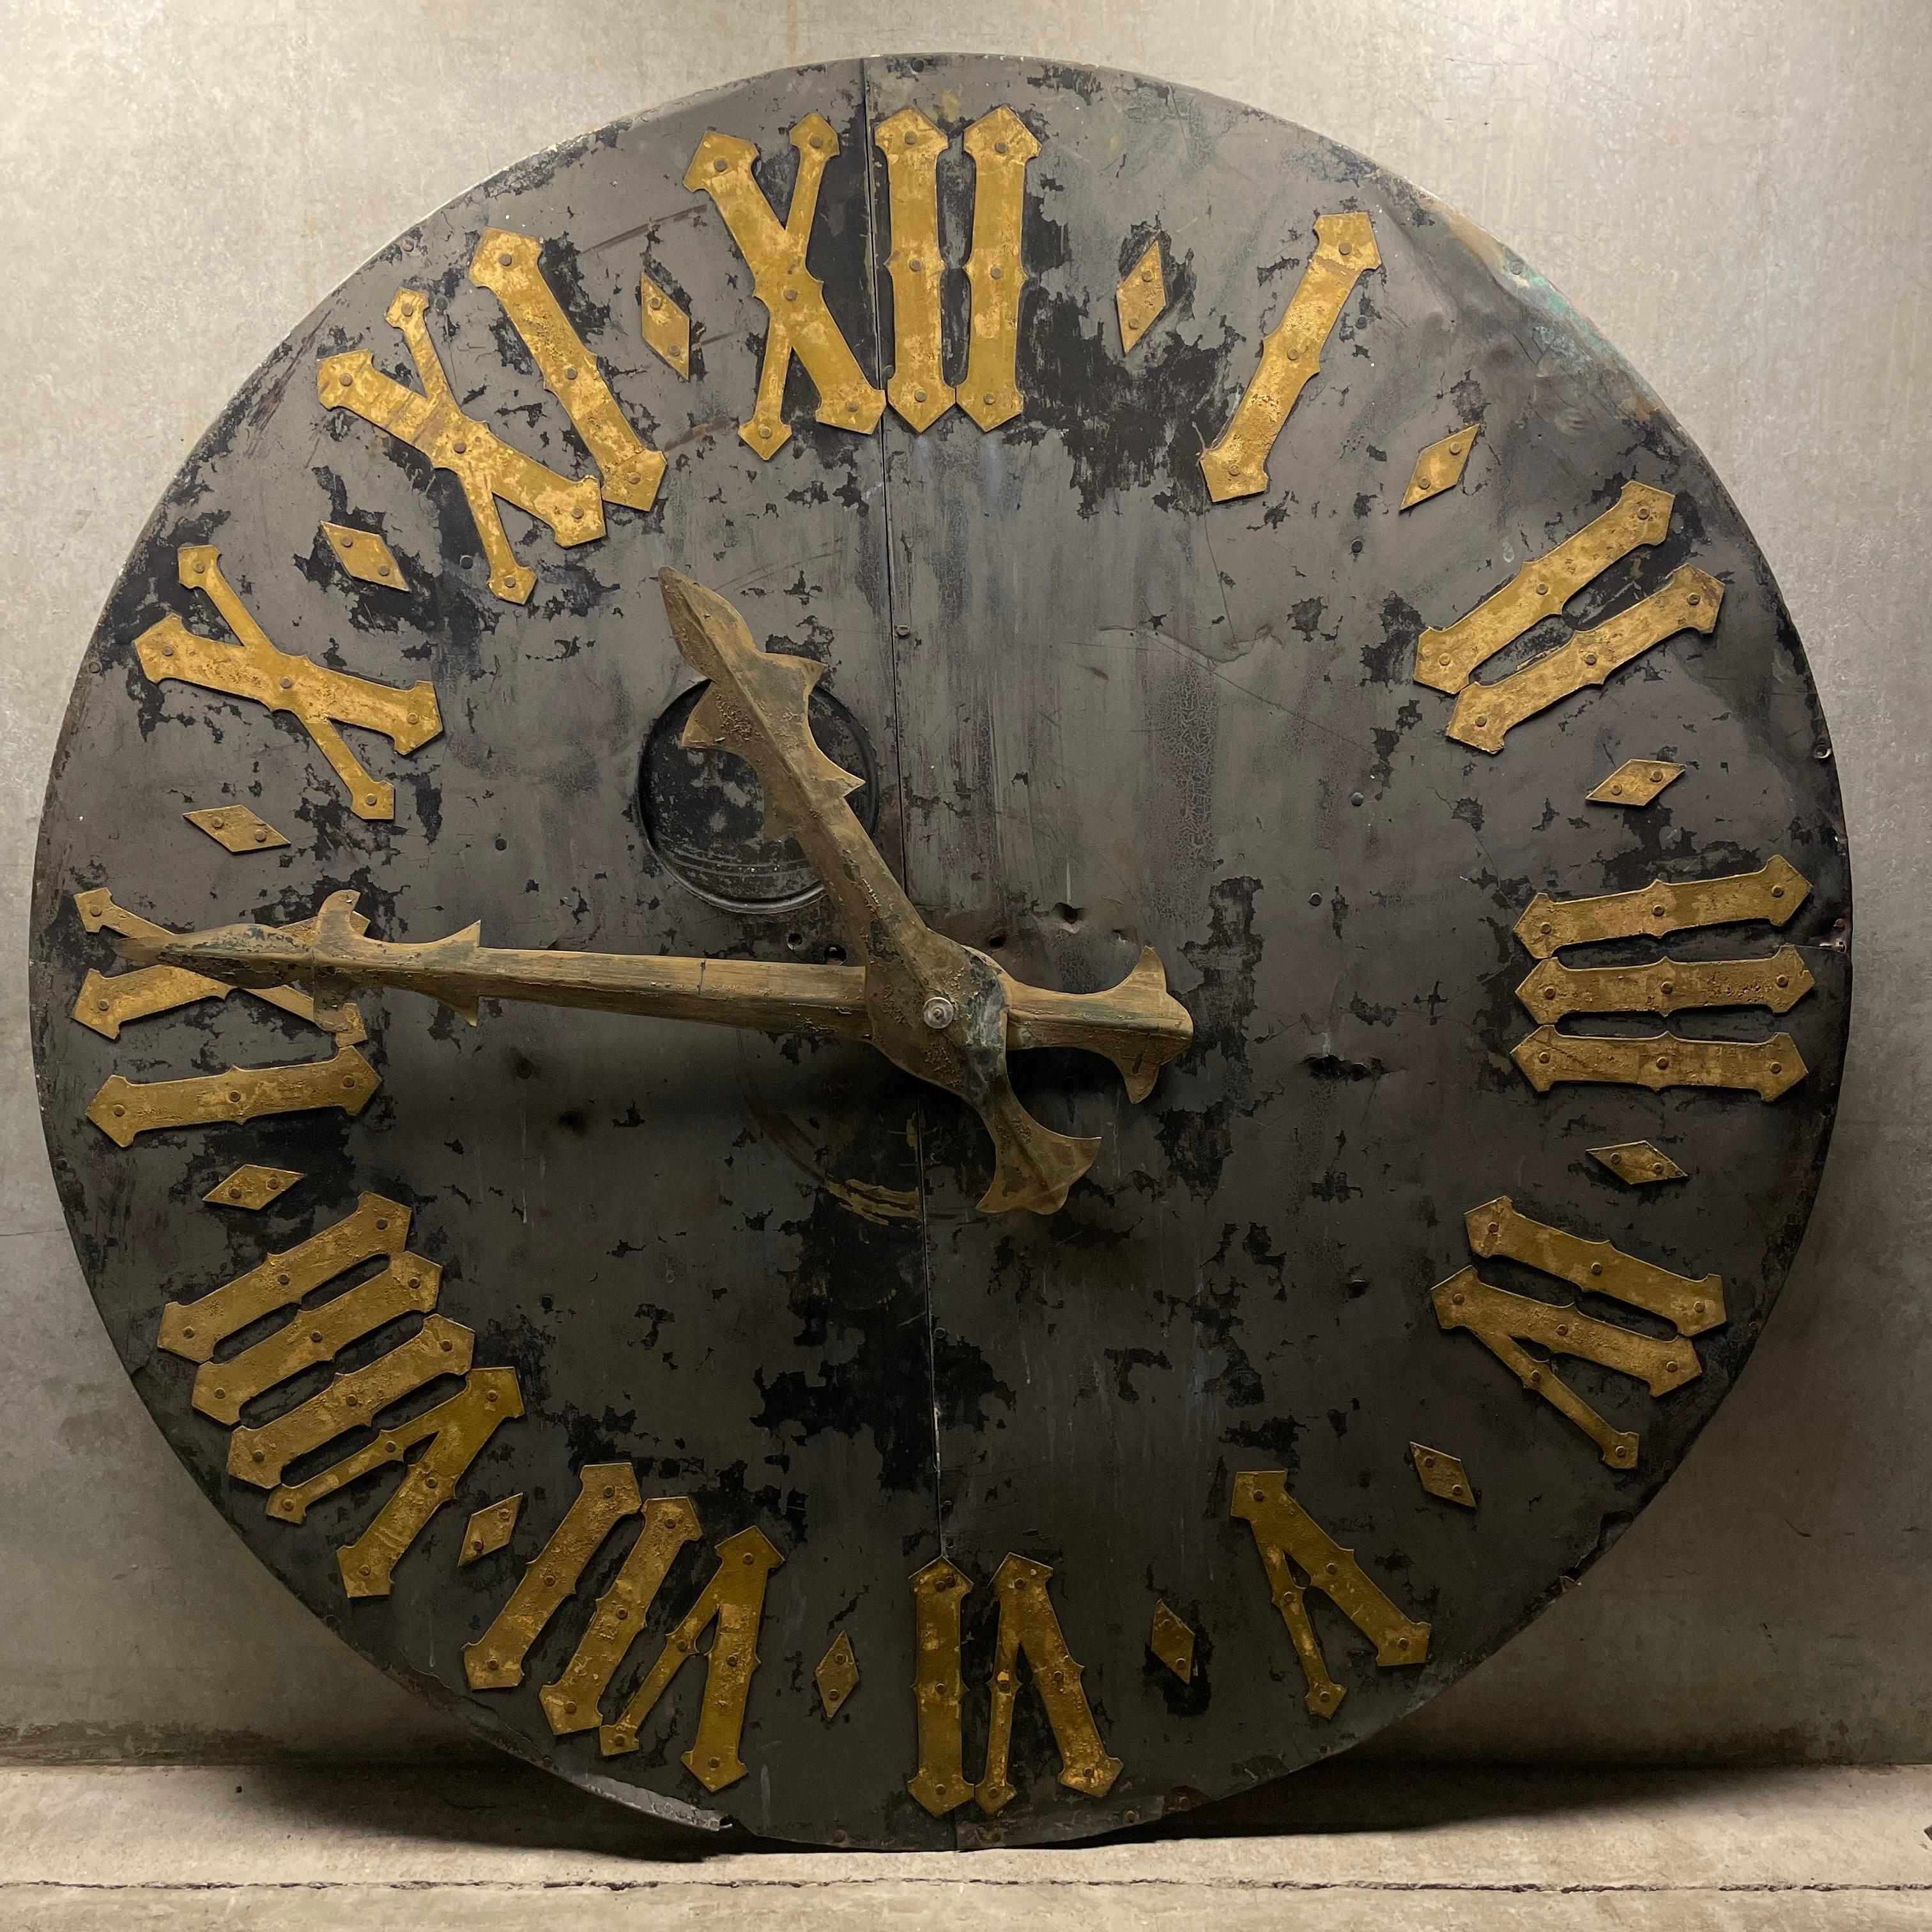 A very impressive large clock face from a tower in France.  The surface is outstanding showing old black finish with gilded highlights.   Patina is great ..

Interesting that the material is heavy copper and details are subtle but perfect. 

Easy